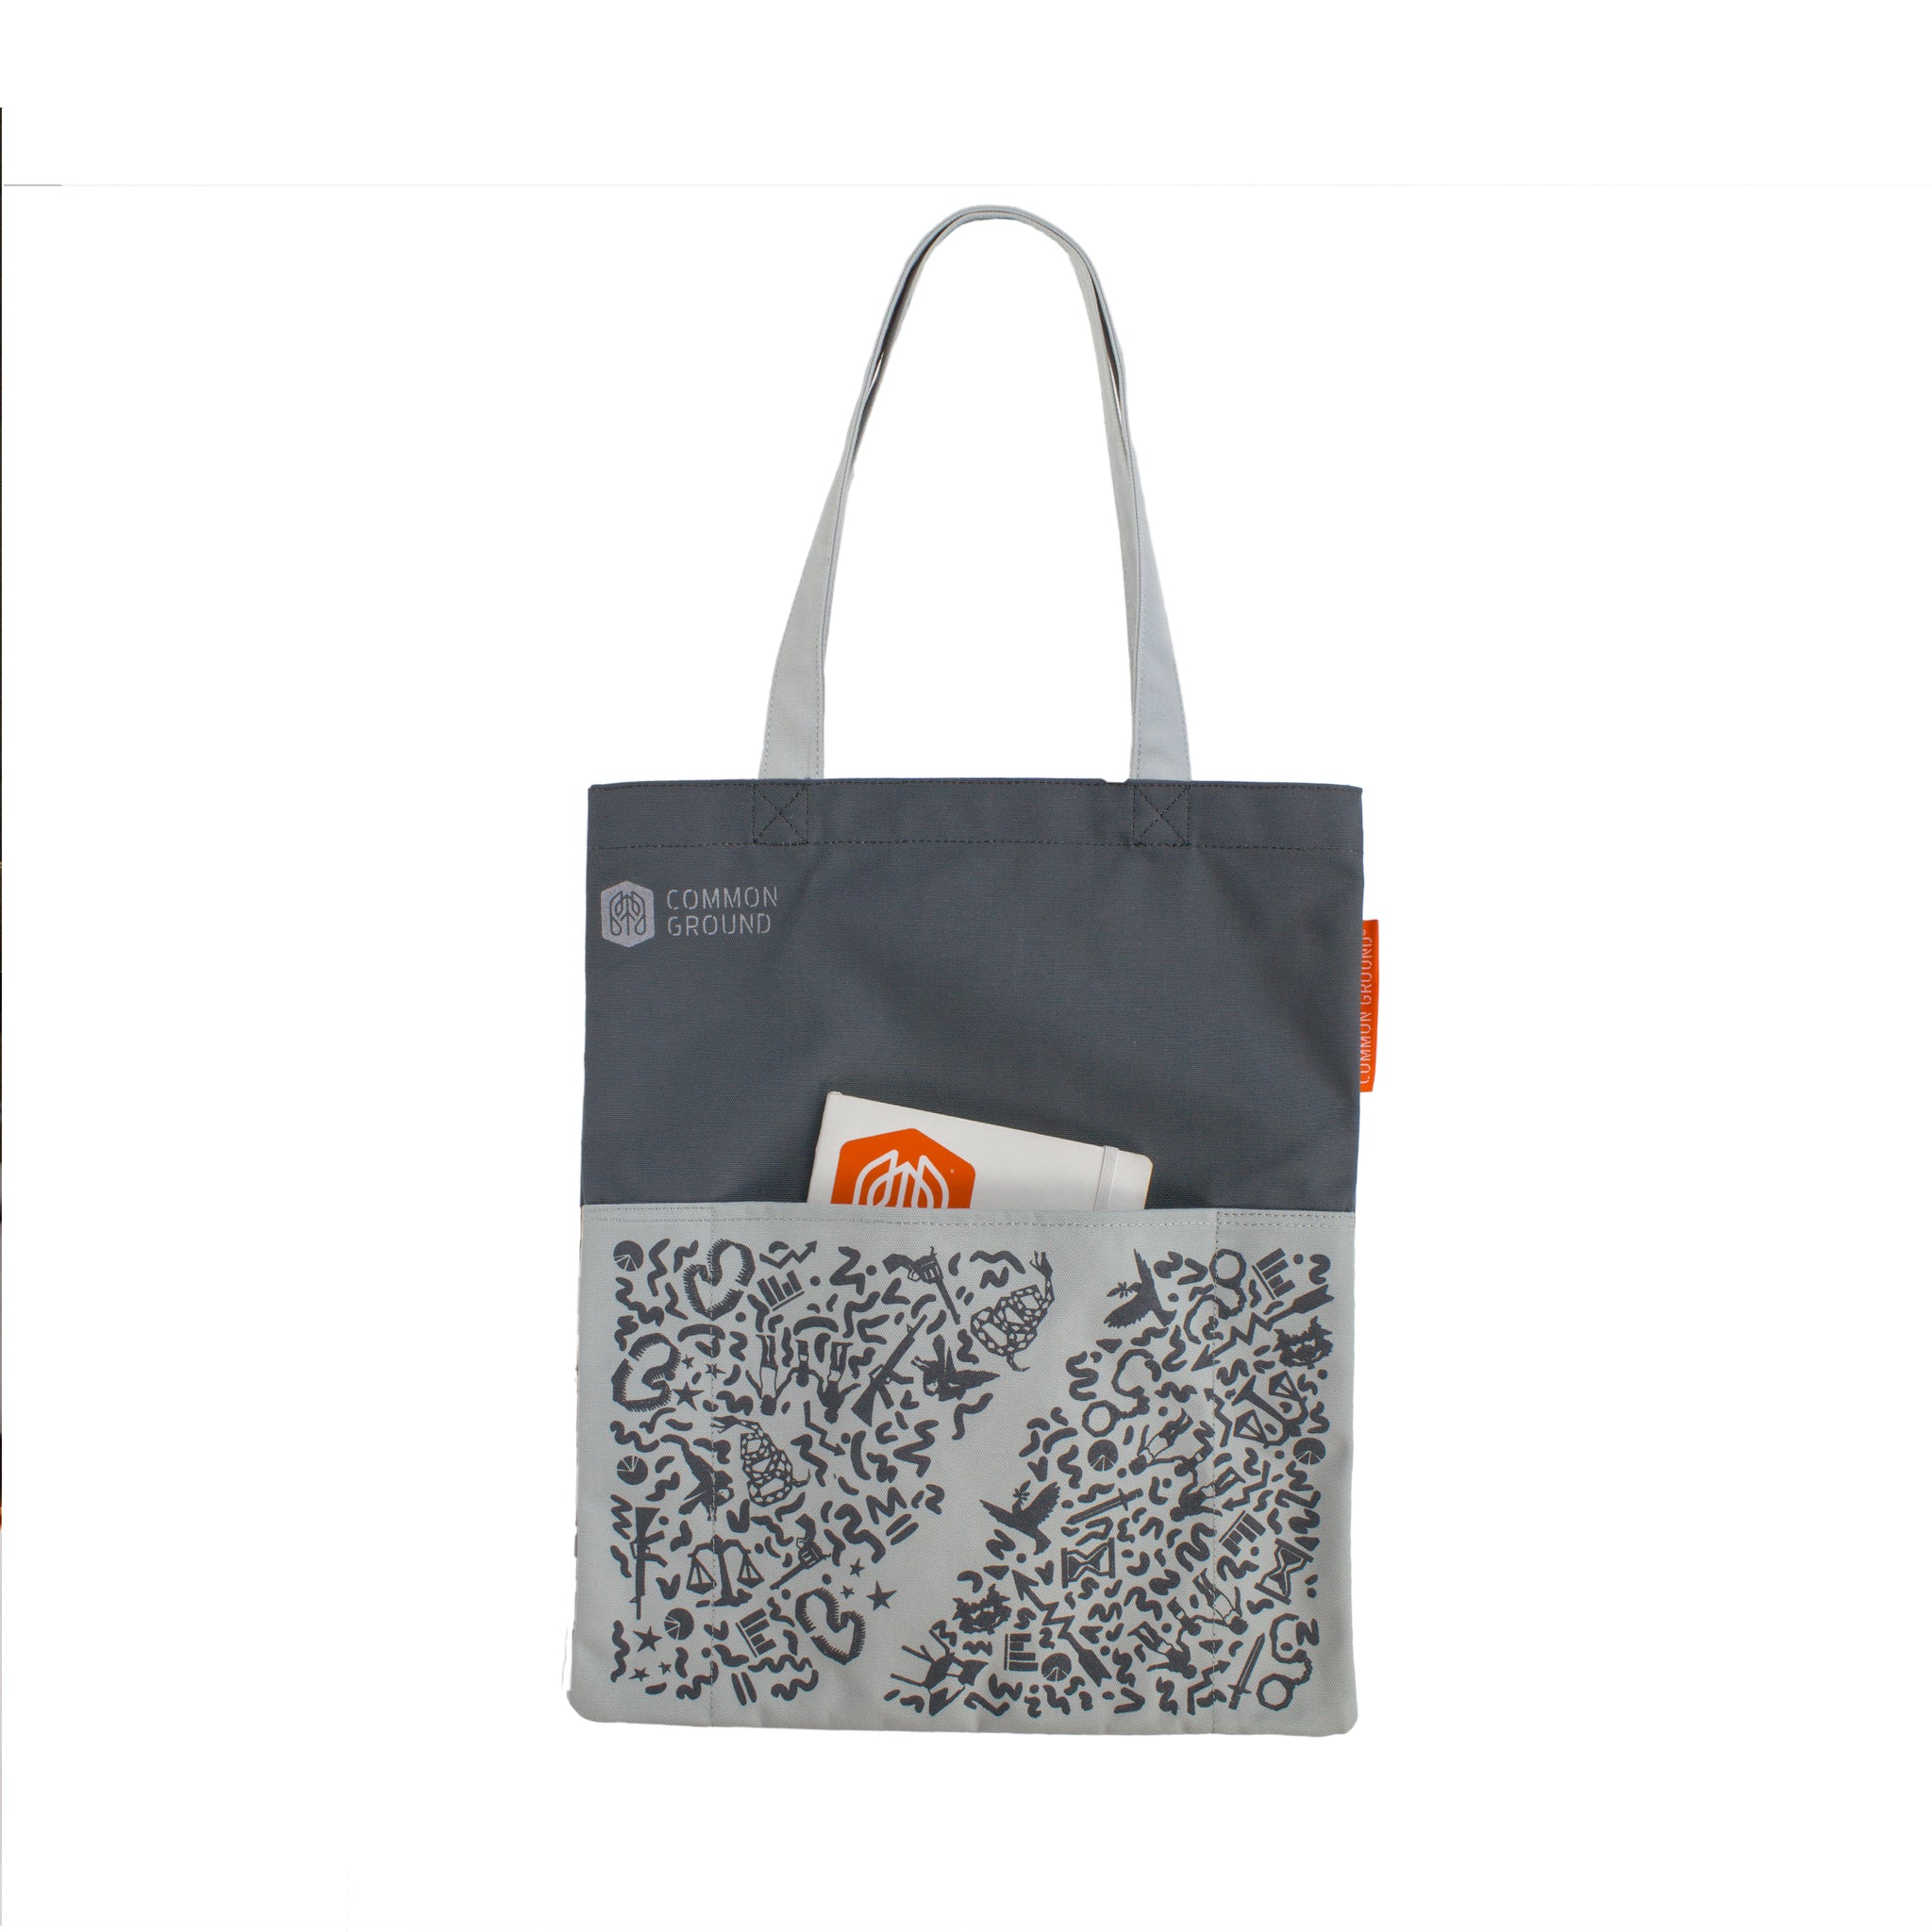 Castle_Rock - Common Ground Reading Tote Front External Pocket View